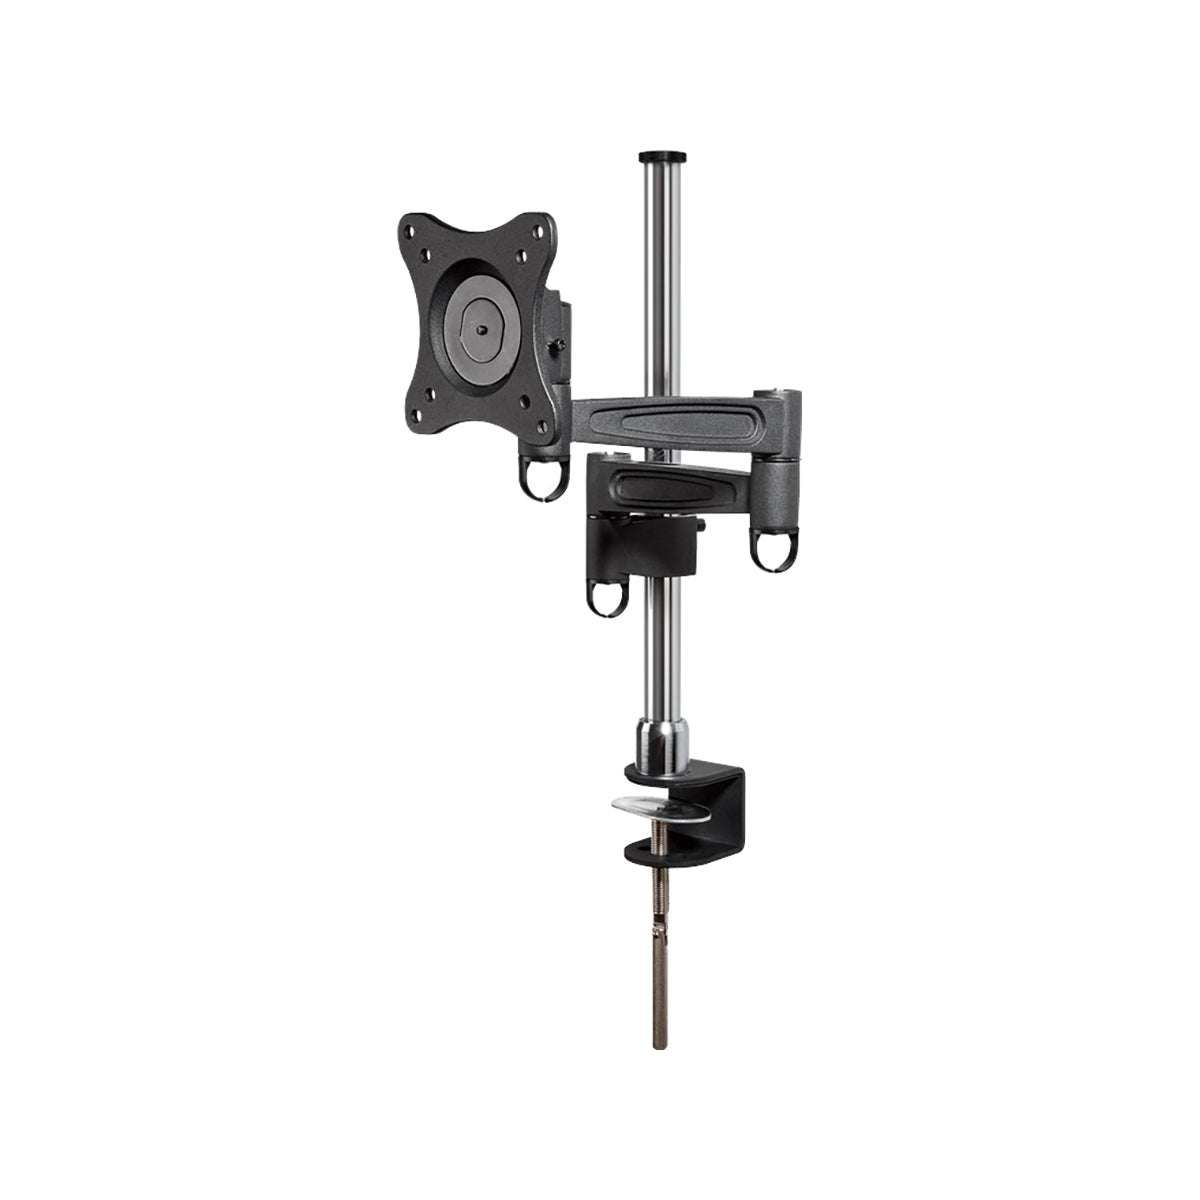 Goobay Screen Scope Telescopic Table Mounting Bracket S for Table Mounting with Extendable Arm